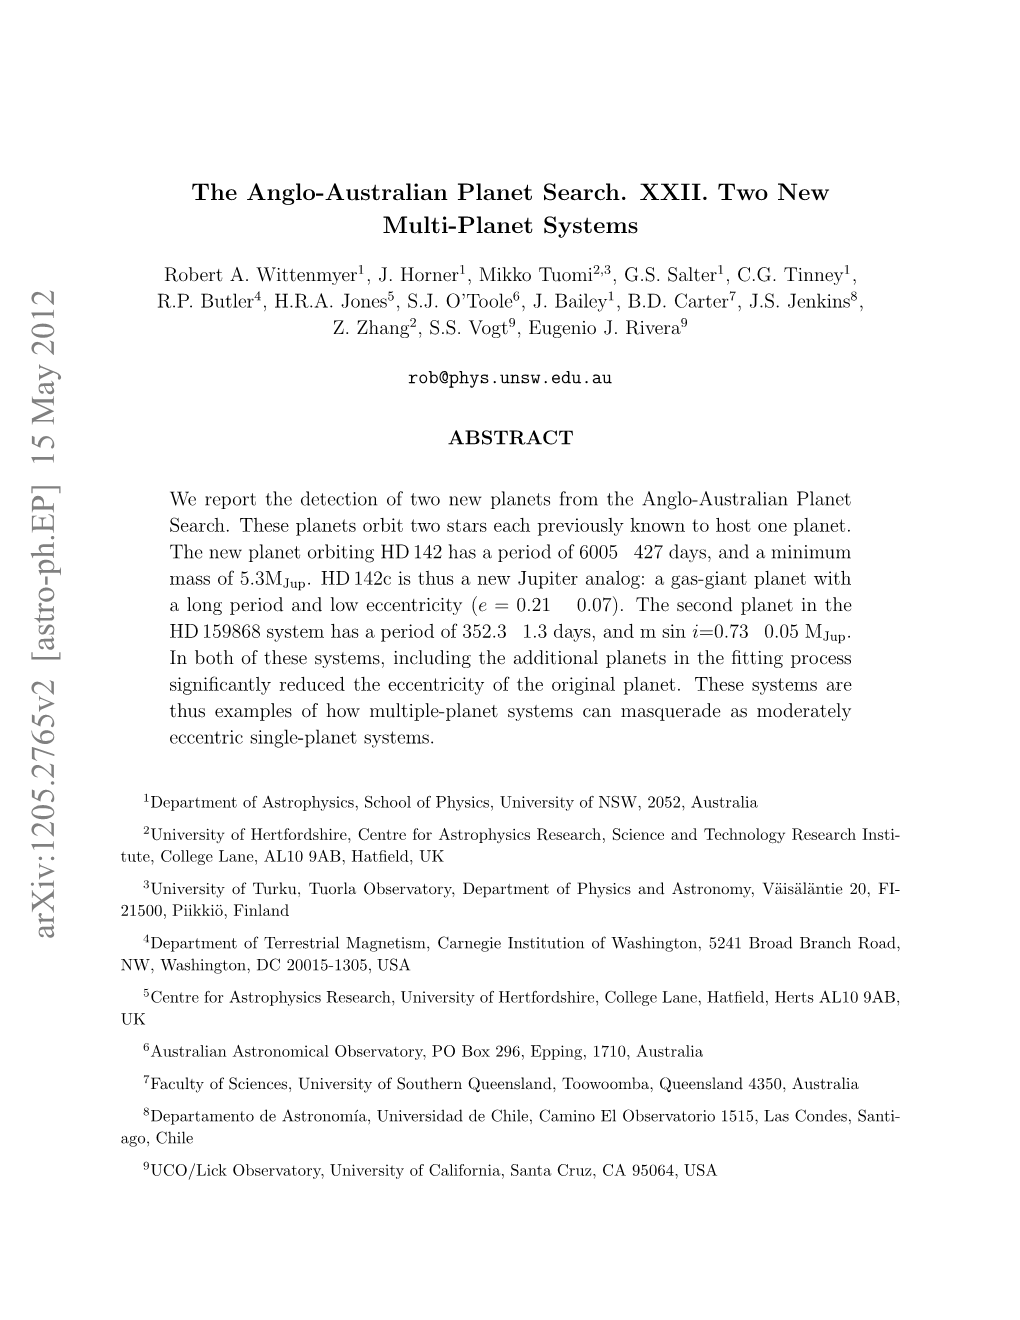 The Anglo-Australian Planet Search. XXII. Two New Multi-Planet Systems